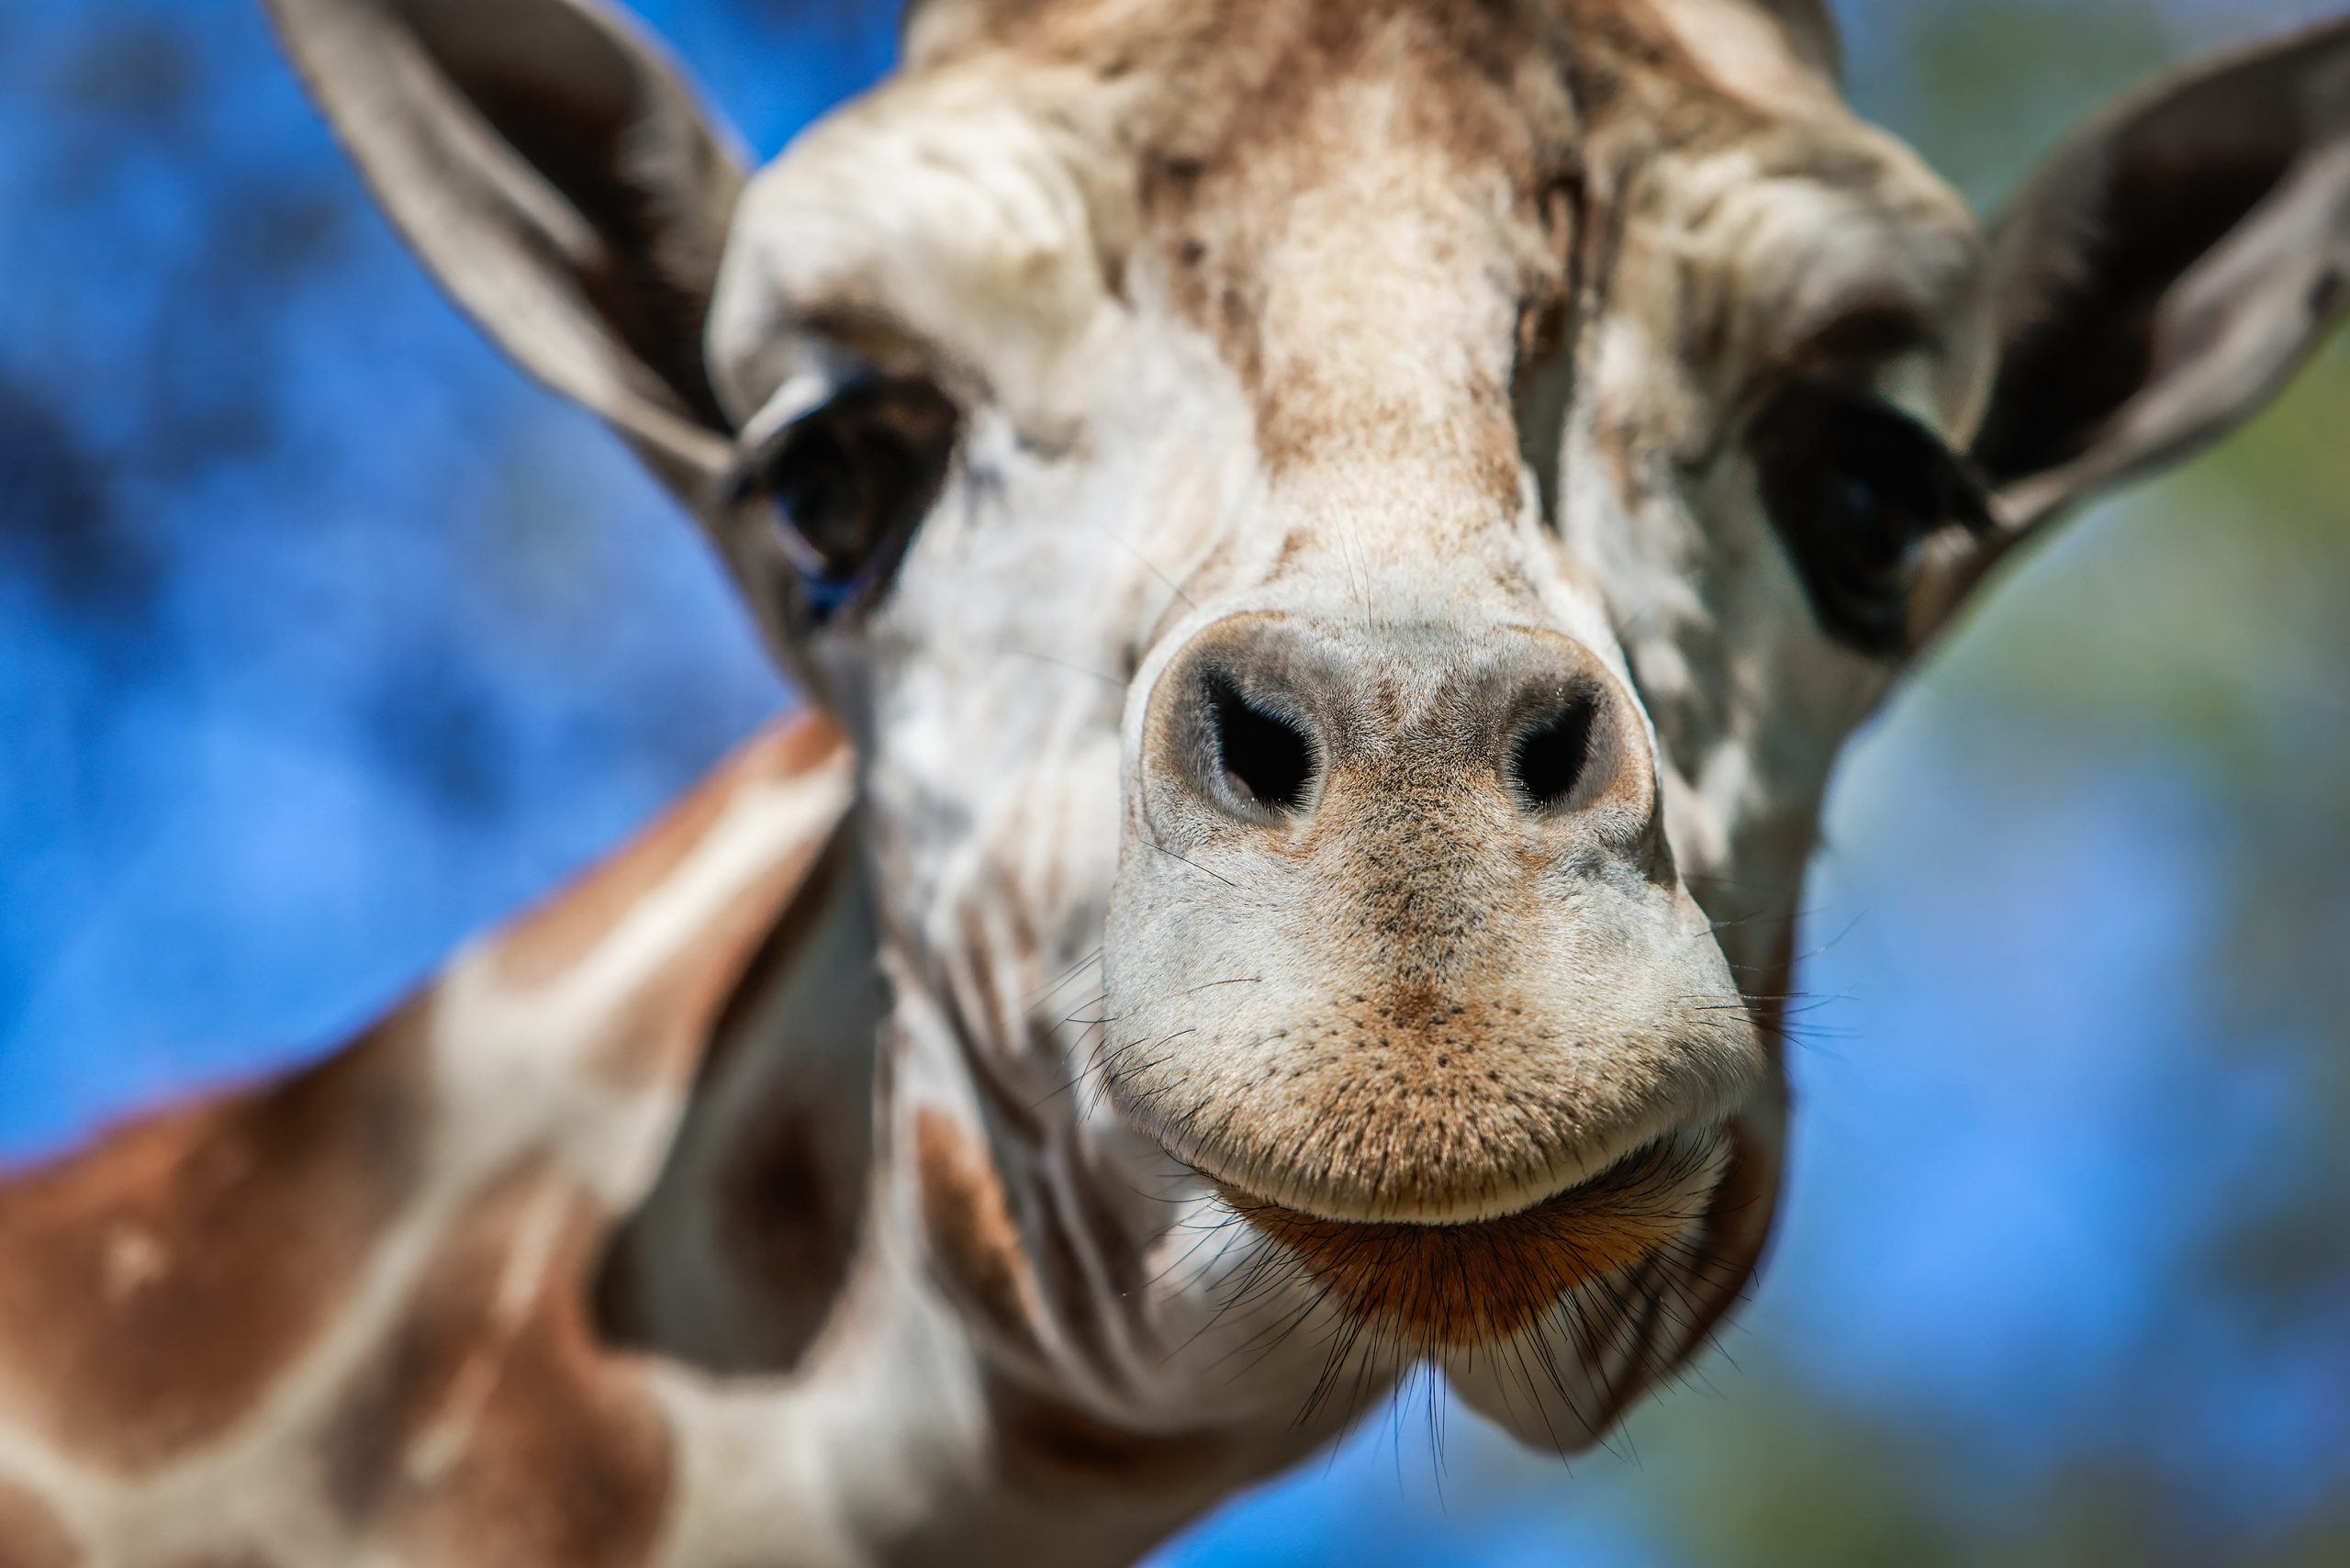 As you approach the end of the drive-through, the giraffes come into view from their separate enclosure. Elliott is 15 feet tall and 6 years old.  